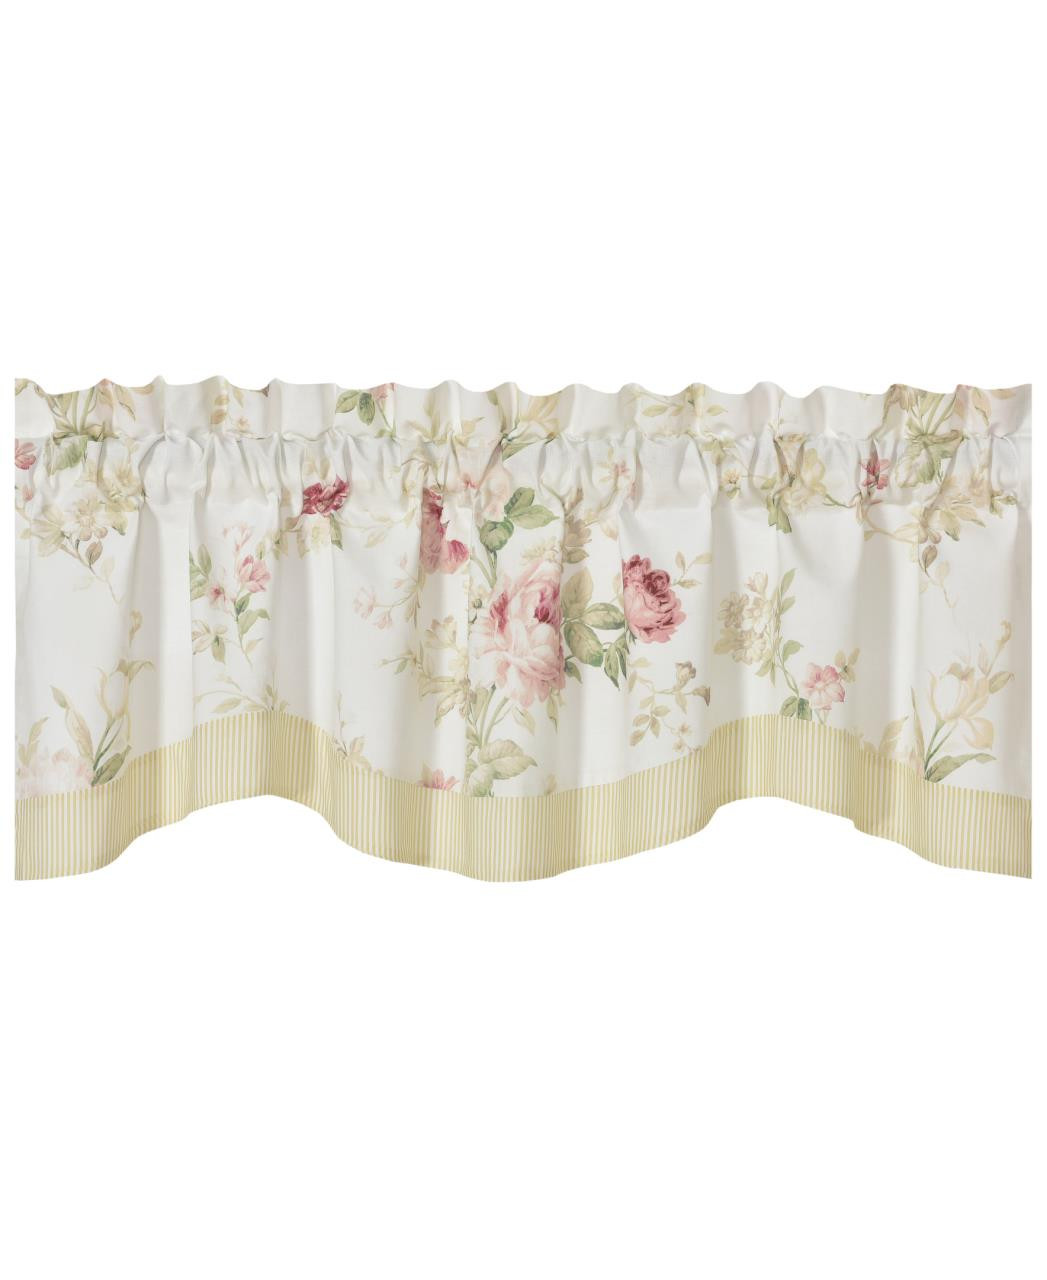 Amalia Rose Quilted Scallop Valance - 193842133347